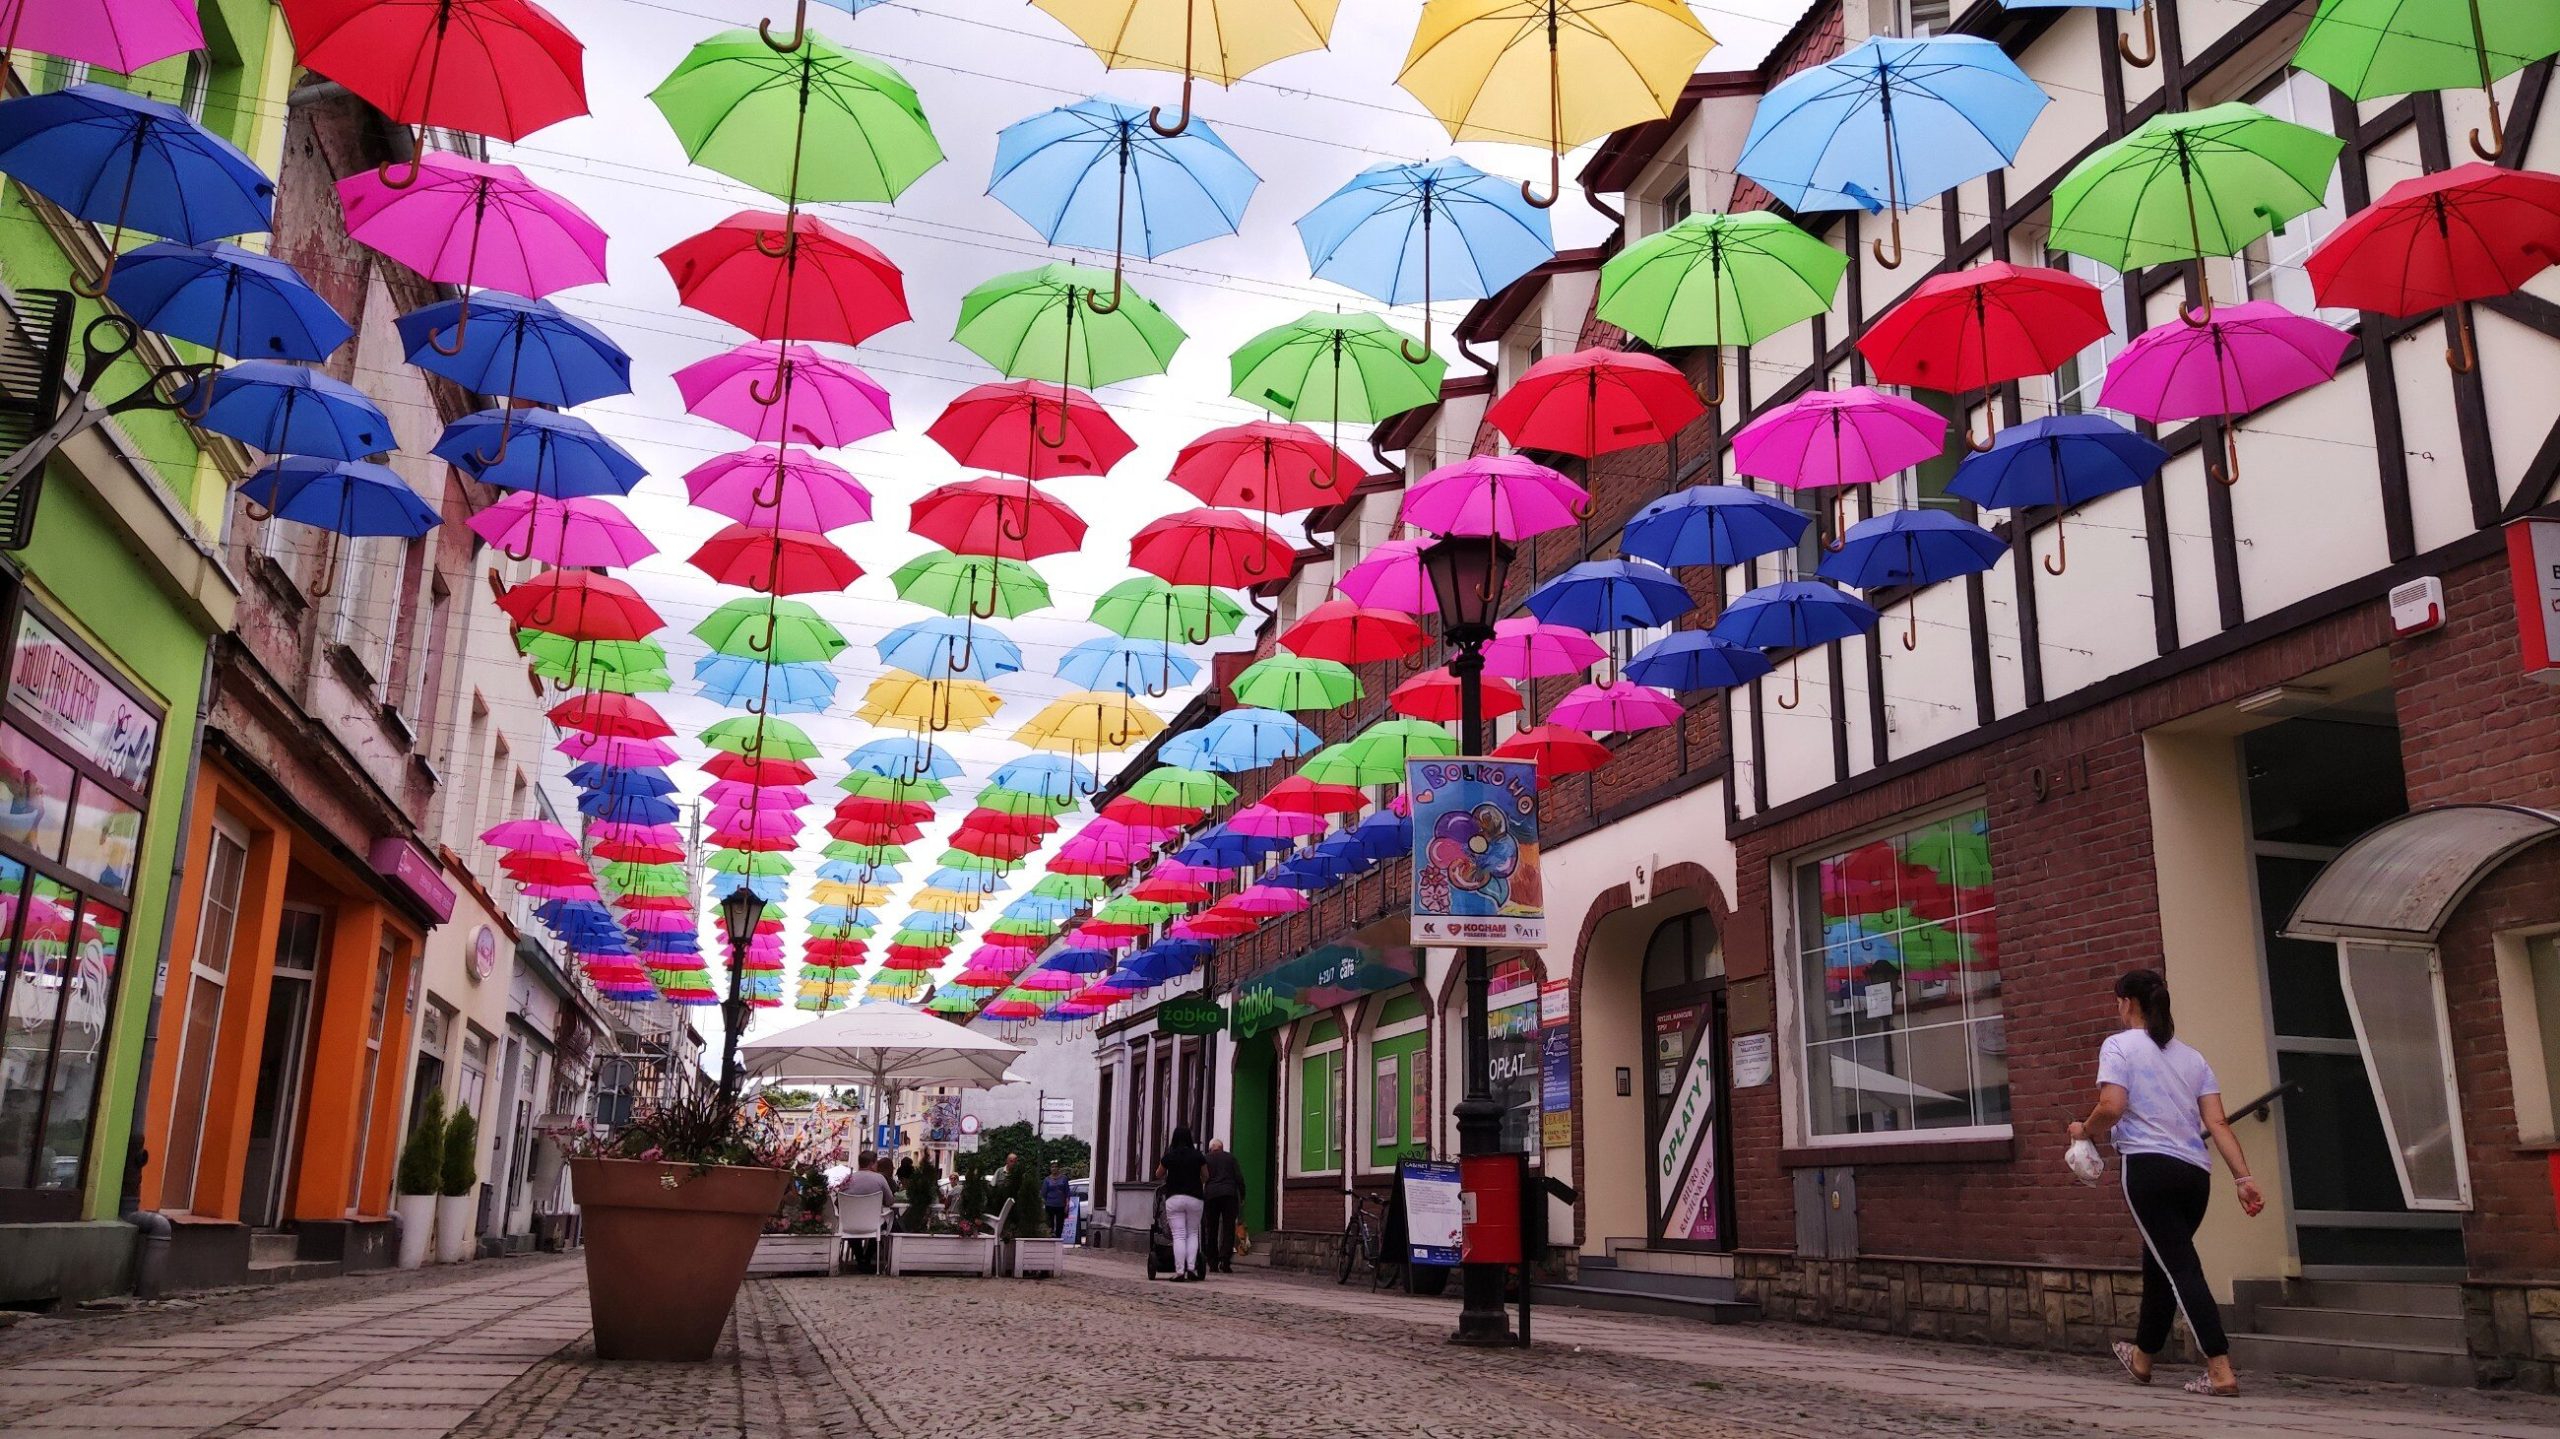 The colorful street of umbrellas in a Polish town delights tourists.  But that's not the greatest treasure of this place